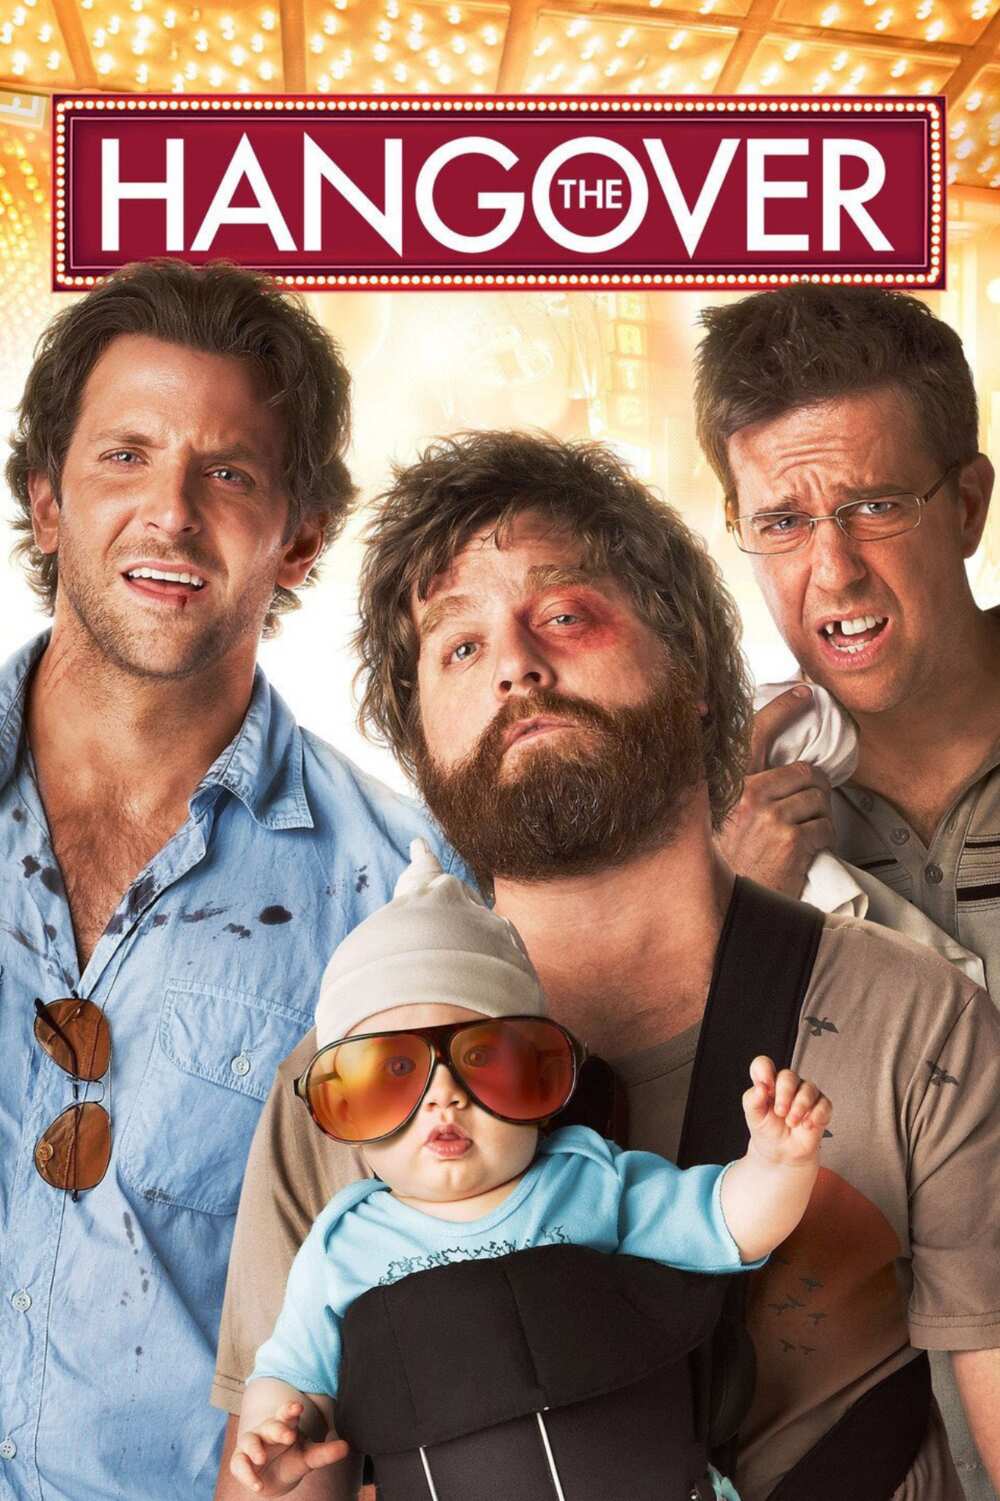 did stu really lose a tooth in the hangover?